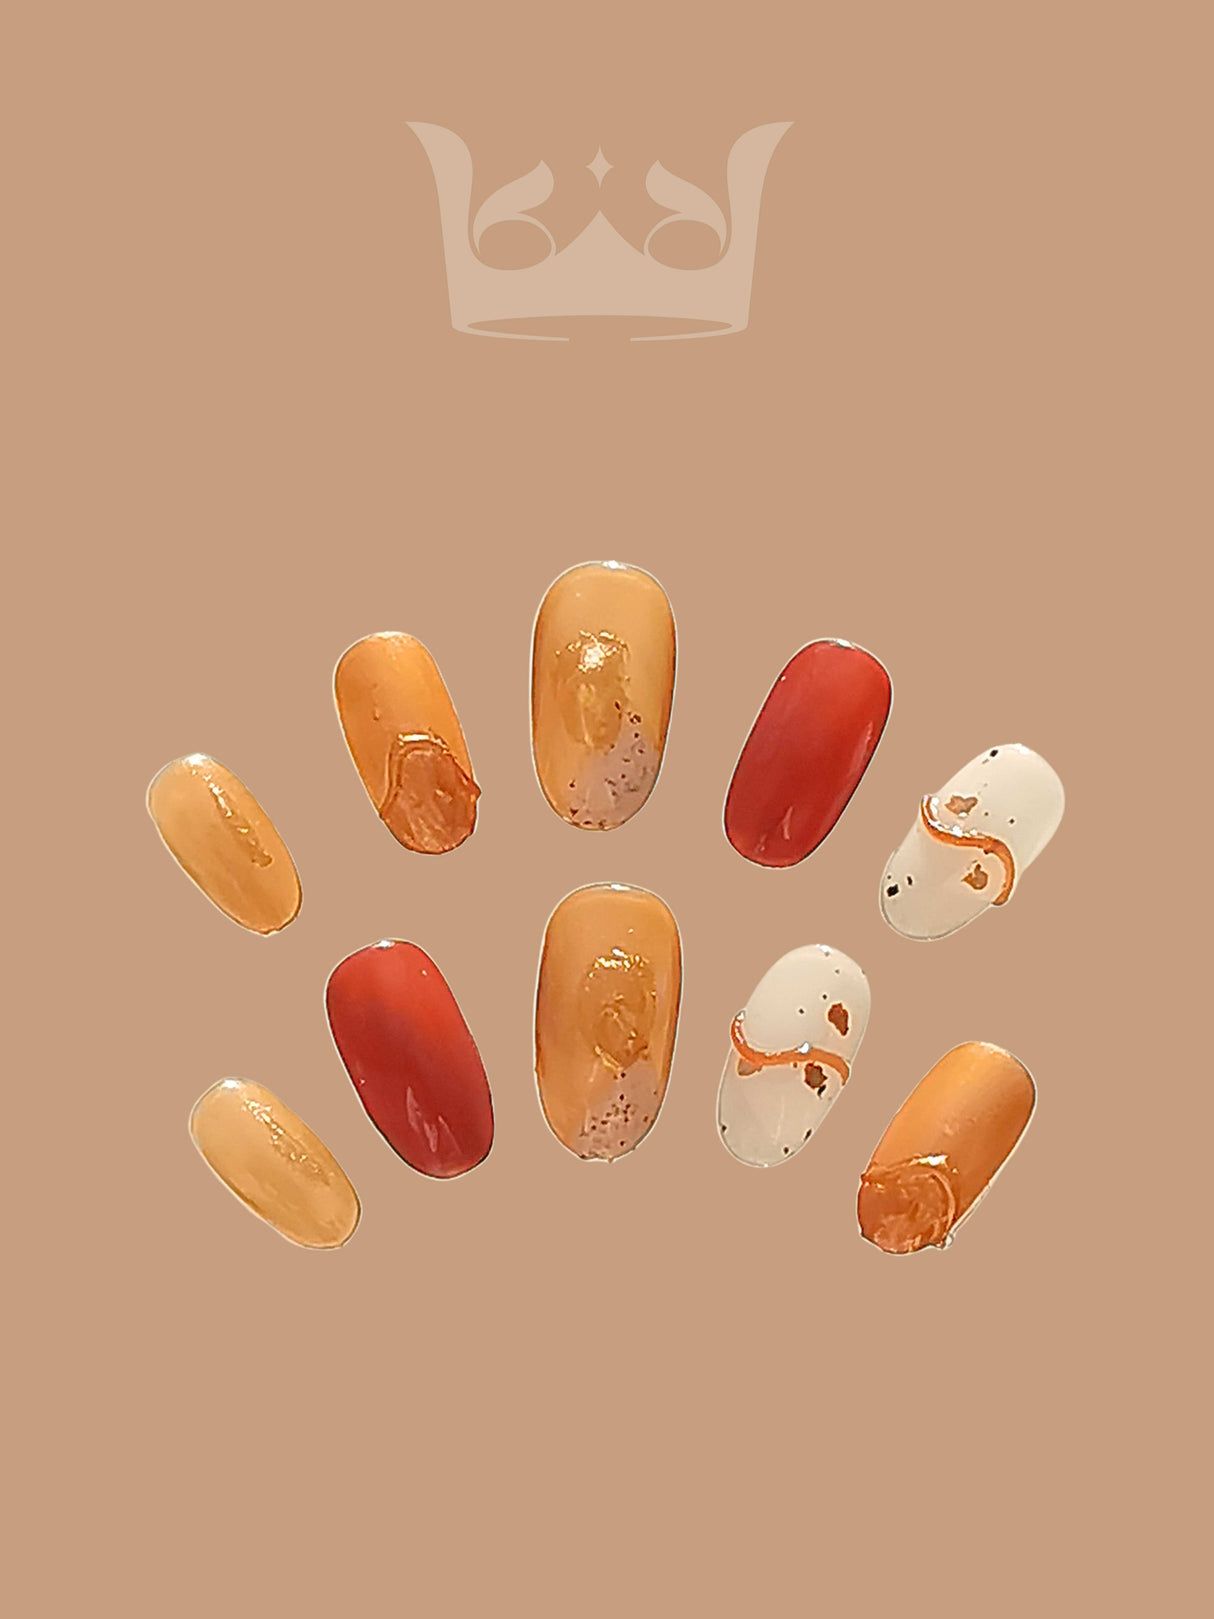 These press-on nails have a warm color palette, solid colors with metallic or glossy finishes, a marble effect with gold flakes, and accent nails for a dynamic look.